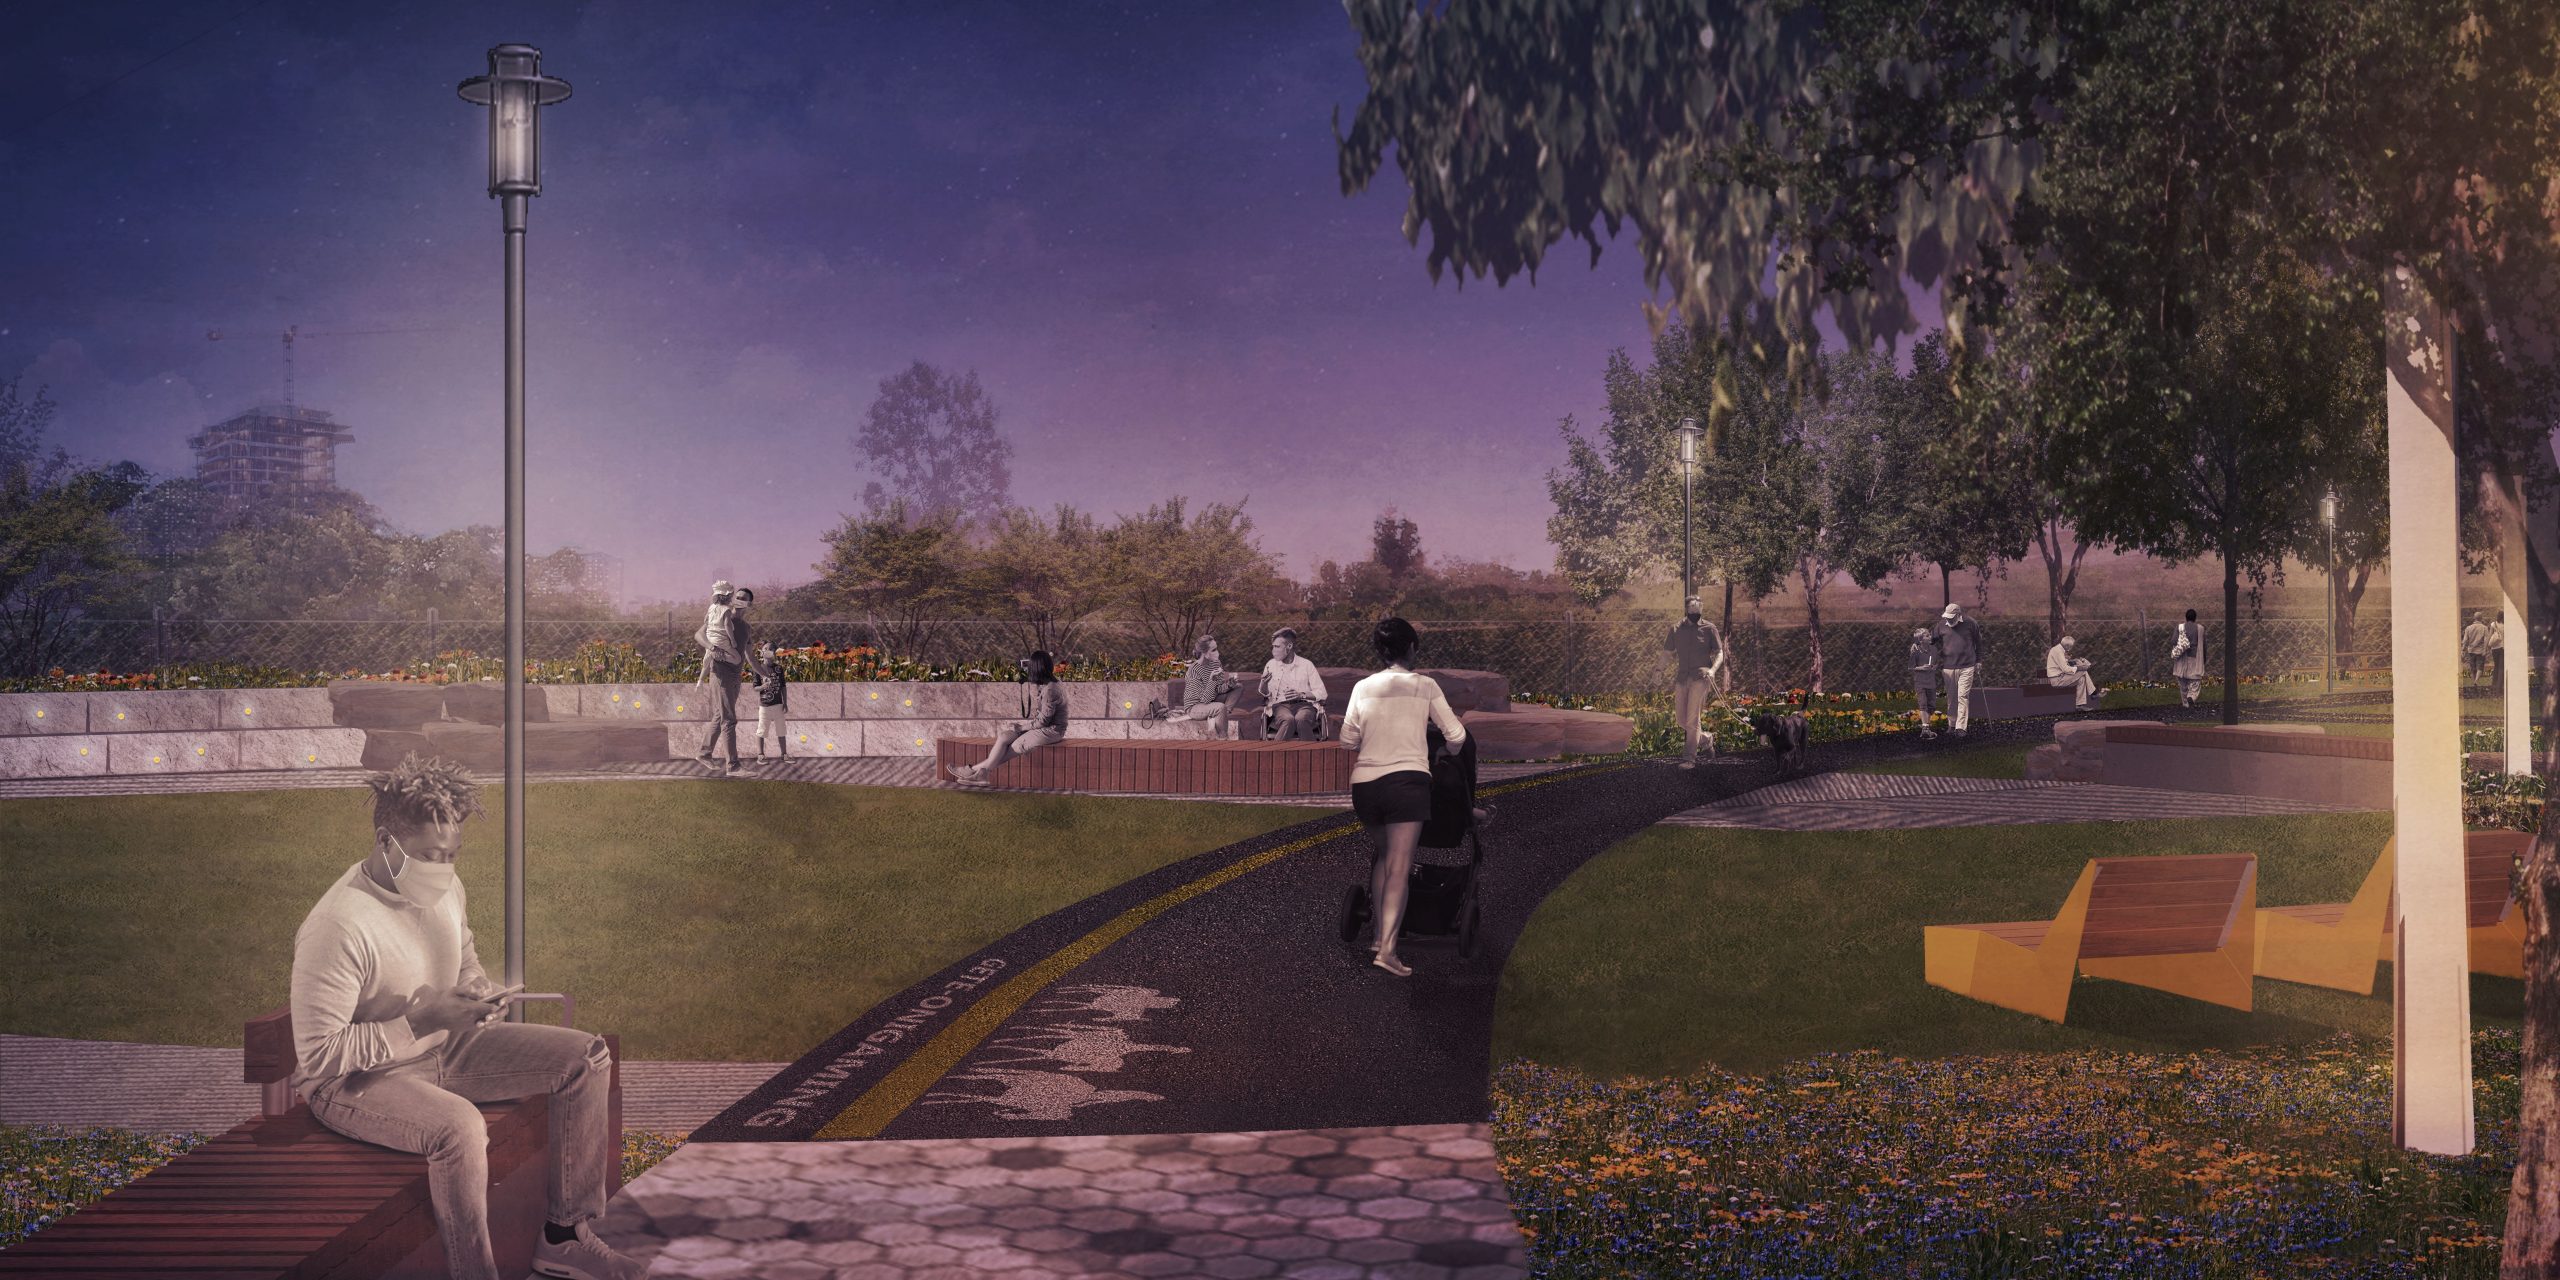 Perspective rendering of the new park at Macpherson Avenue, looking Southwest from the east park entrance. Featured in this image are park users using the park pathways with children, a woman pushing a stroller, and various other users using the seating areas. The image provides a look at the park